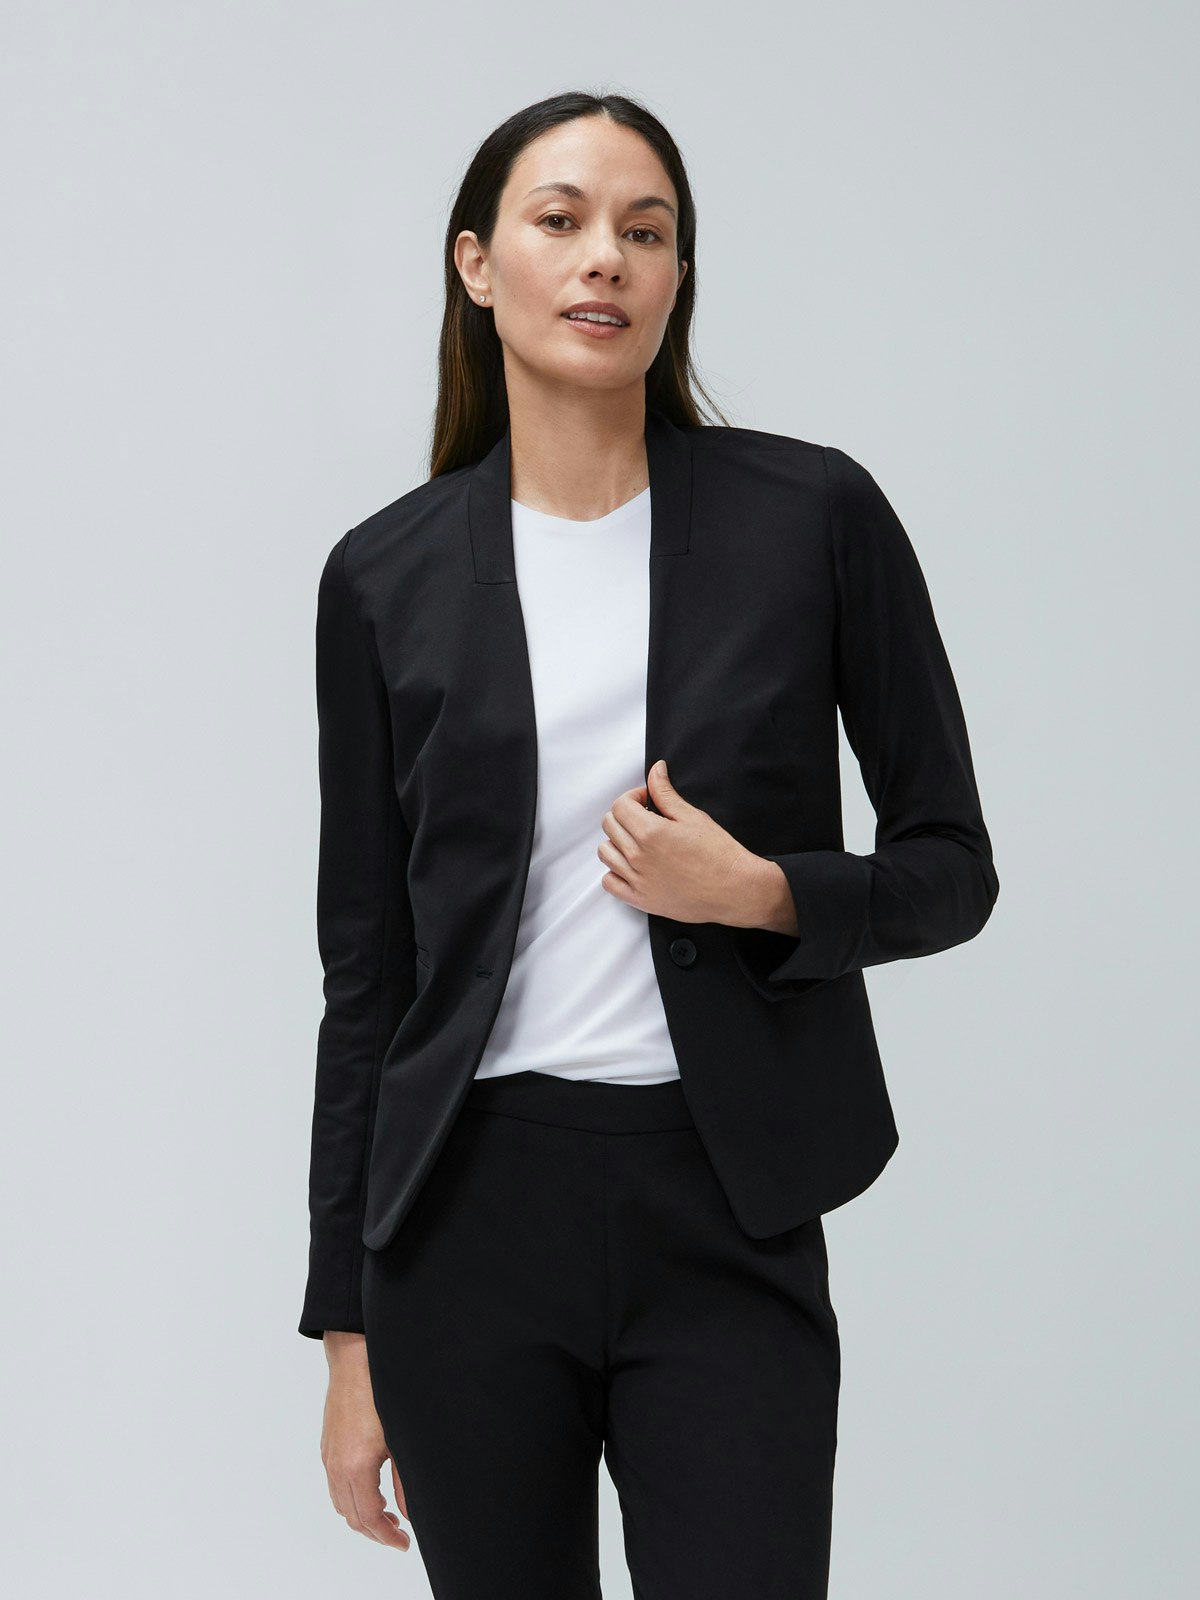 MK988 Womens Casual Solid Slim Fit One Button OL Blazer Suit Jacket Coat 